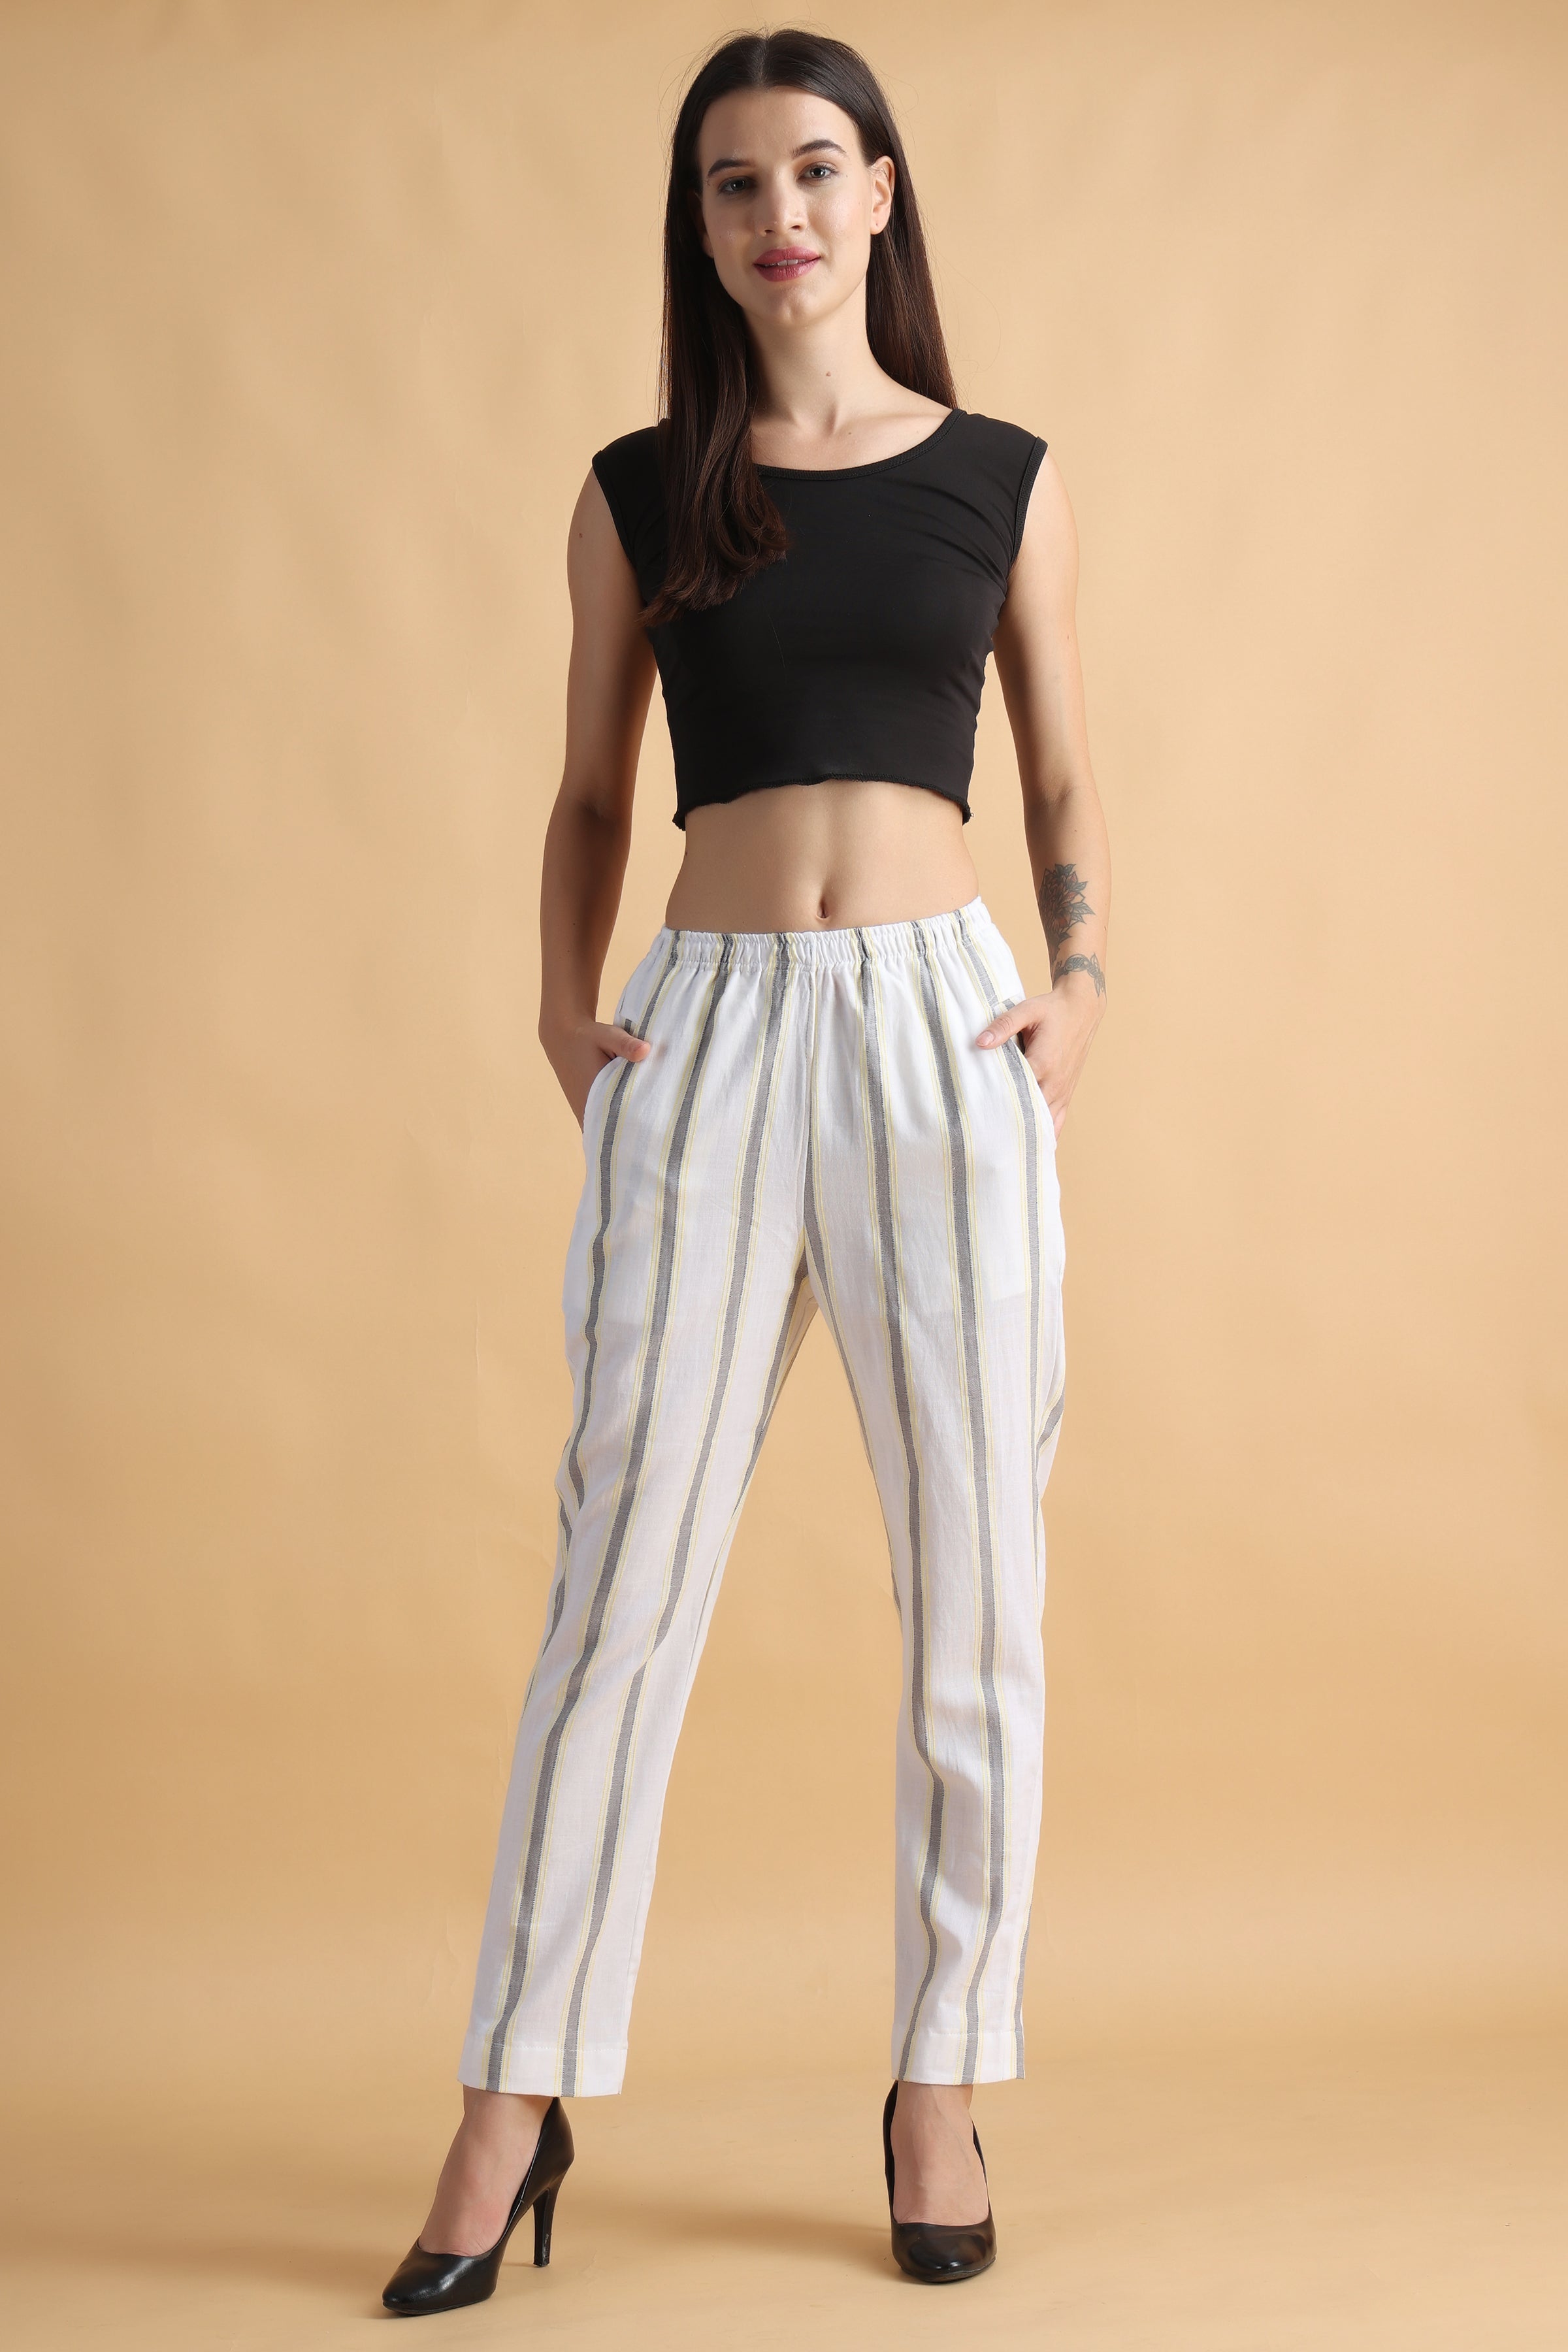 AND Relaxed Women Black Trousers  Buy AND Relaxed Women Black Trousers  Online at Best Prices in India  Flipkartcom